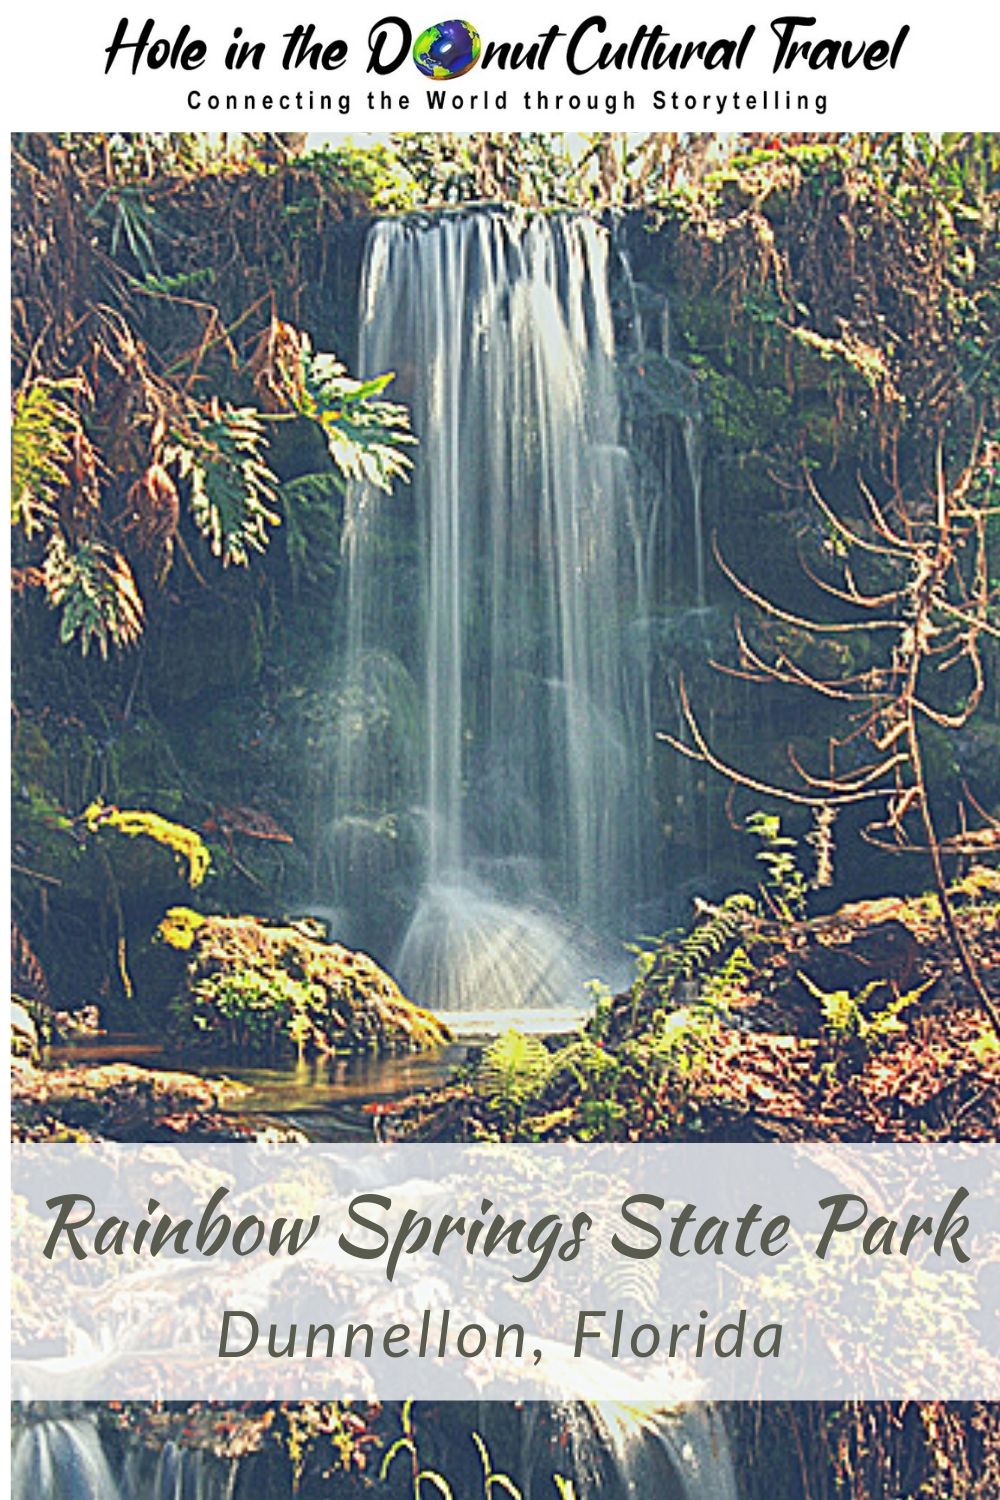 Dunnellon, Florida is Blessed With Natural Attractions Like Rainbow Springs